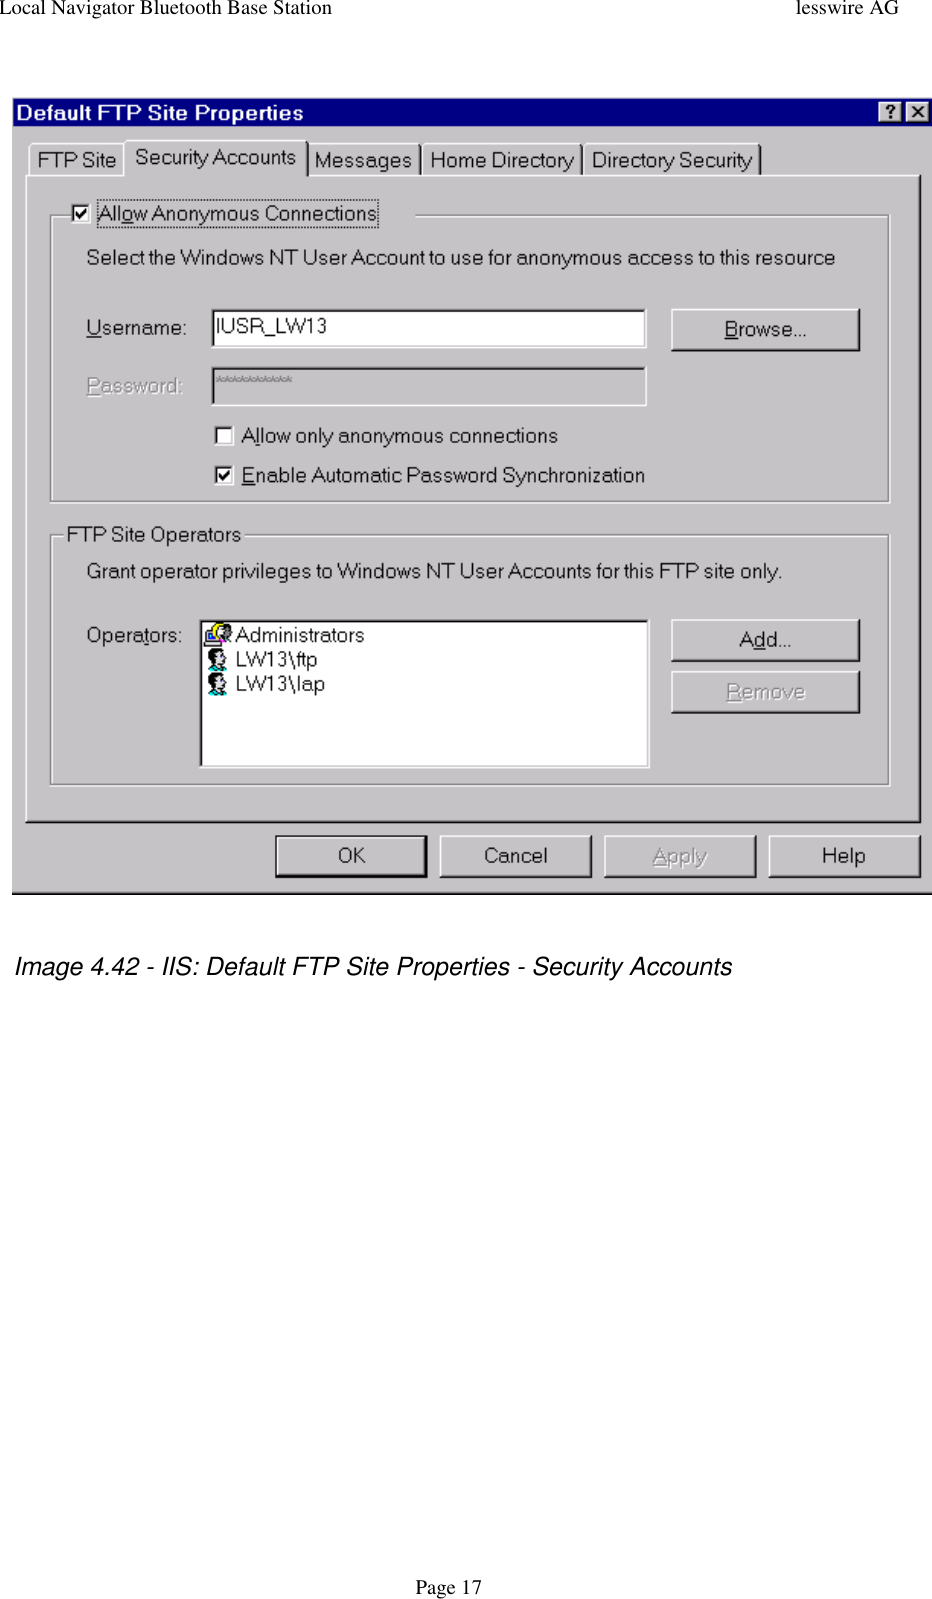 Local Navigator Bluetooth Base Station lesswire AGPage 17  Image 4.42 - IIS: Default FTP Site Properties - Security Accounts